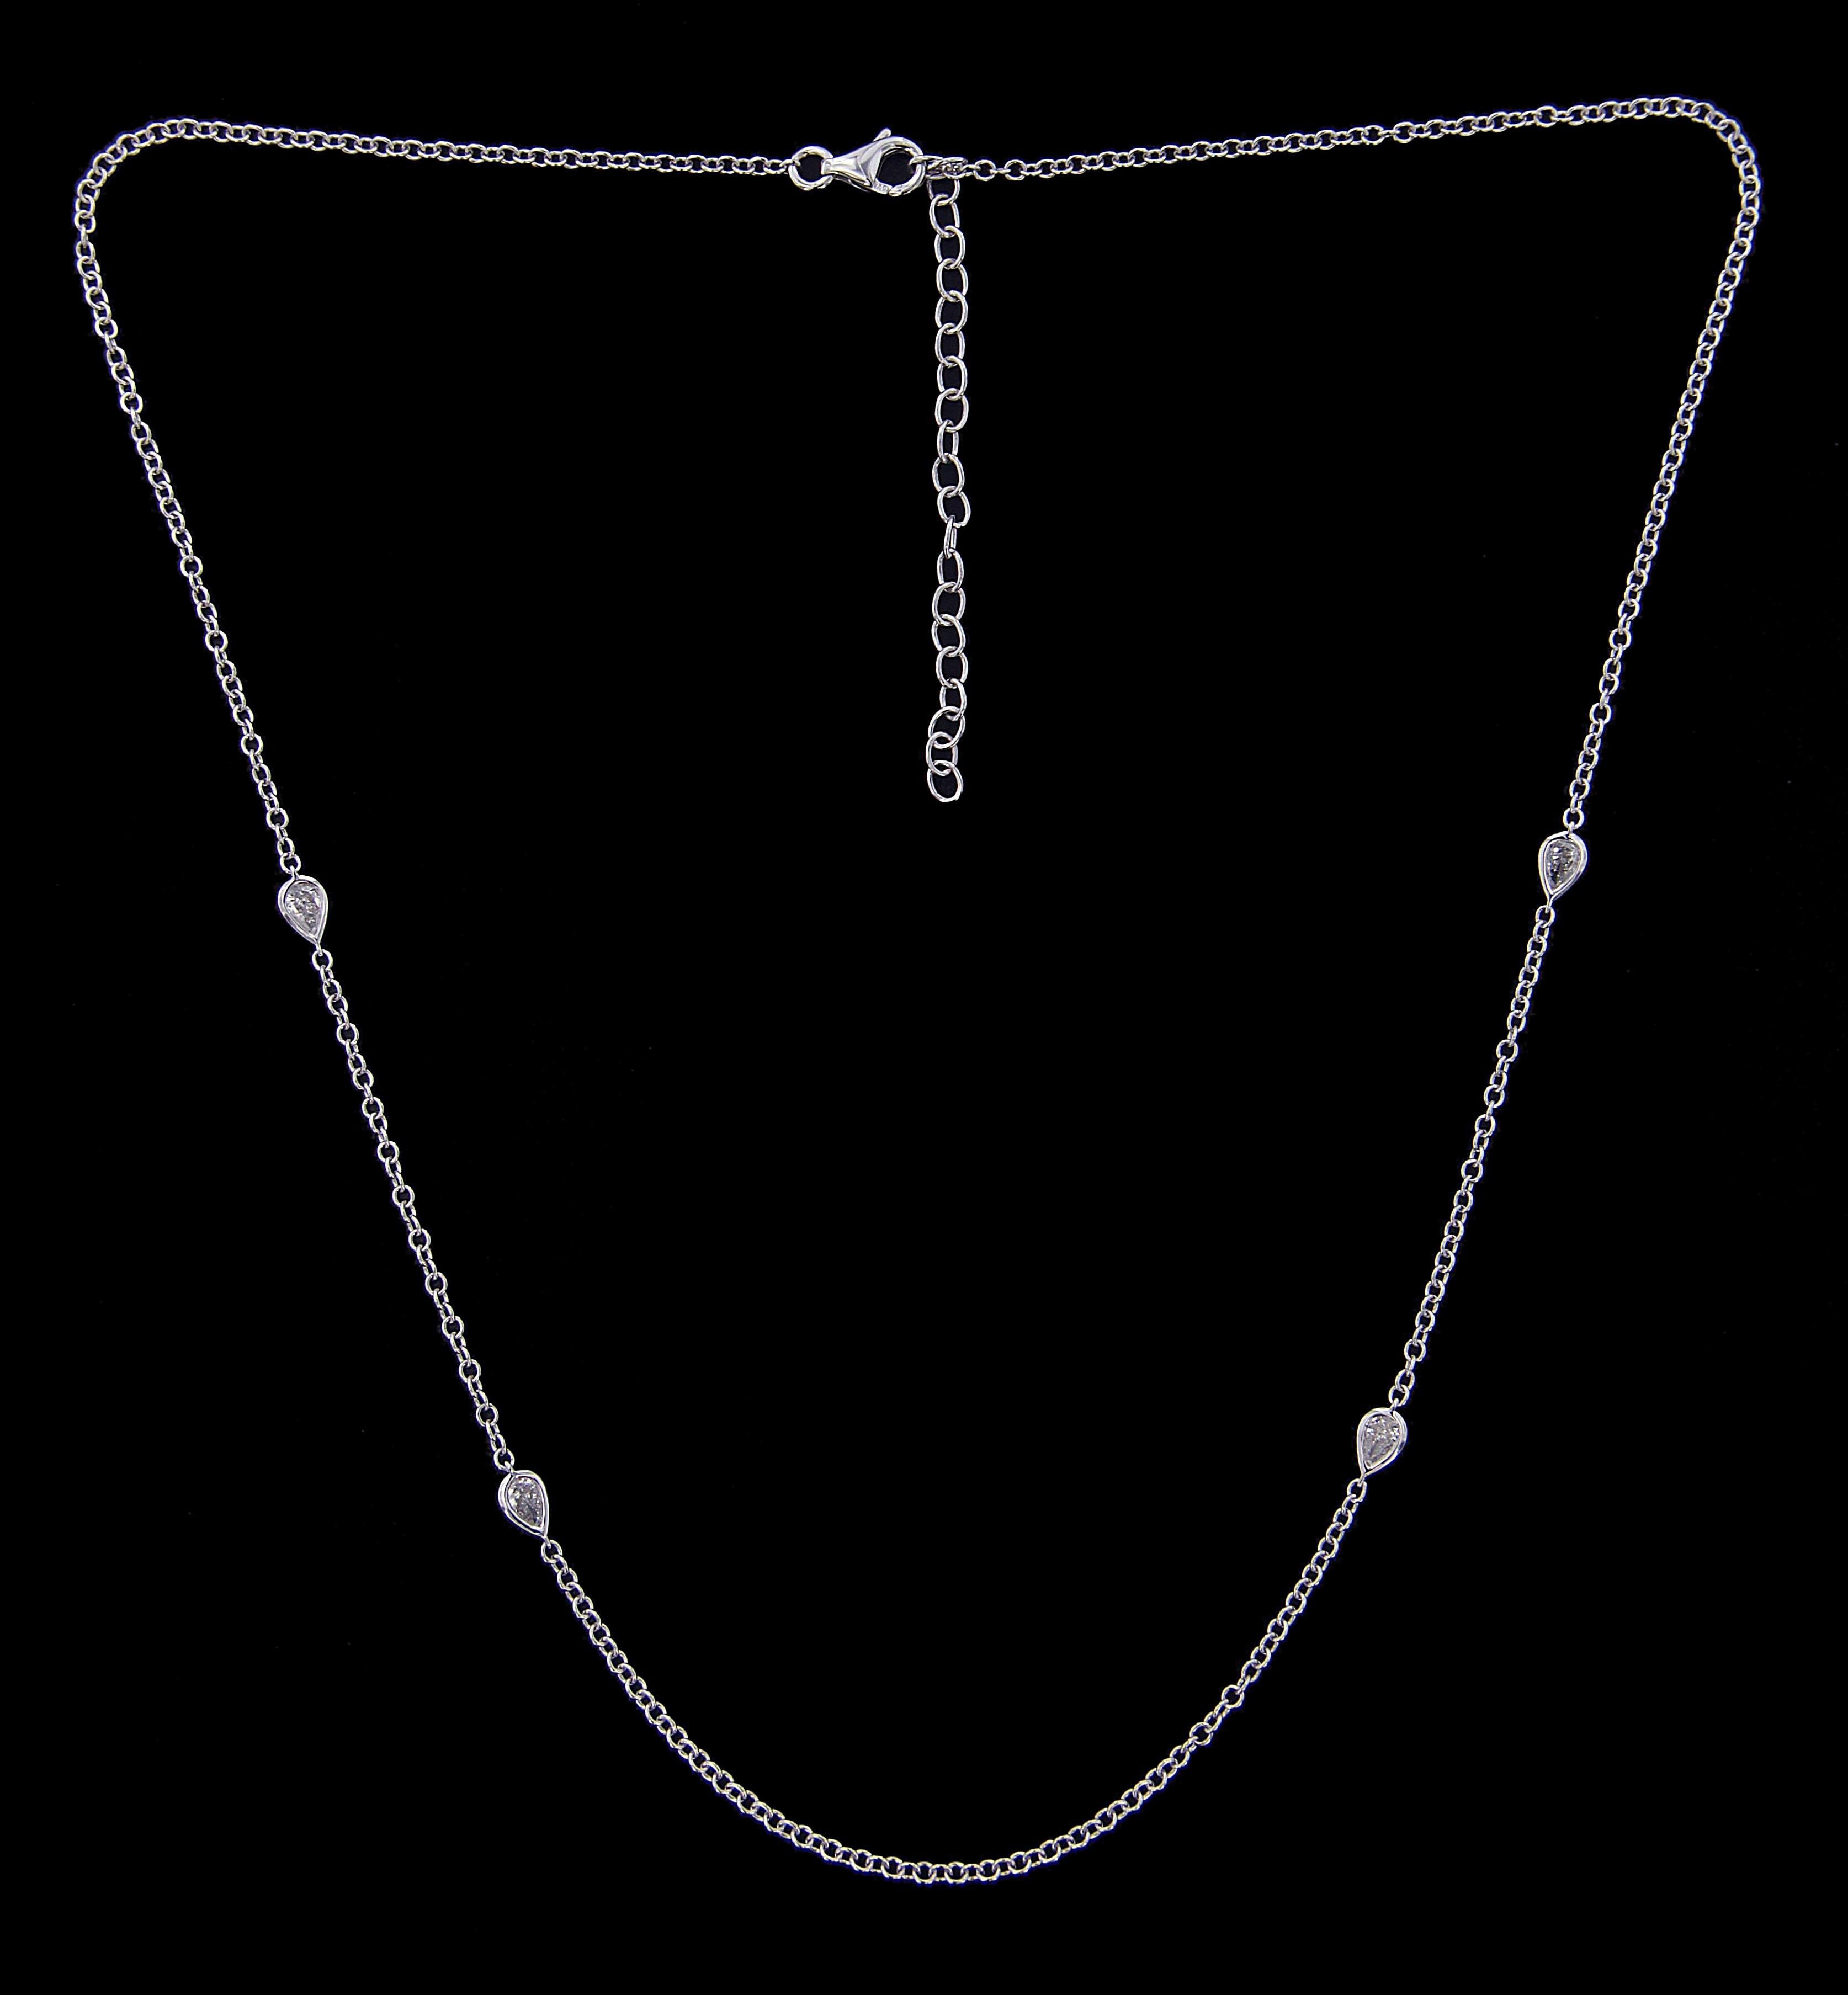 Sublime 18 Karat White Gold Diamond and Diamond Link Necklace.

Diamonds of approximately 0.494 carats mounted on 18 karat white gold necklace. 
The Necklace weighs approximately 2.961 grams.

Please note: The charges specified do not include any